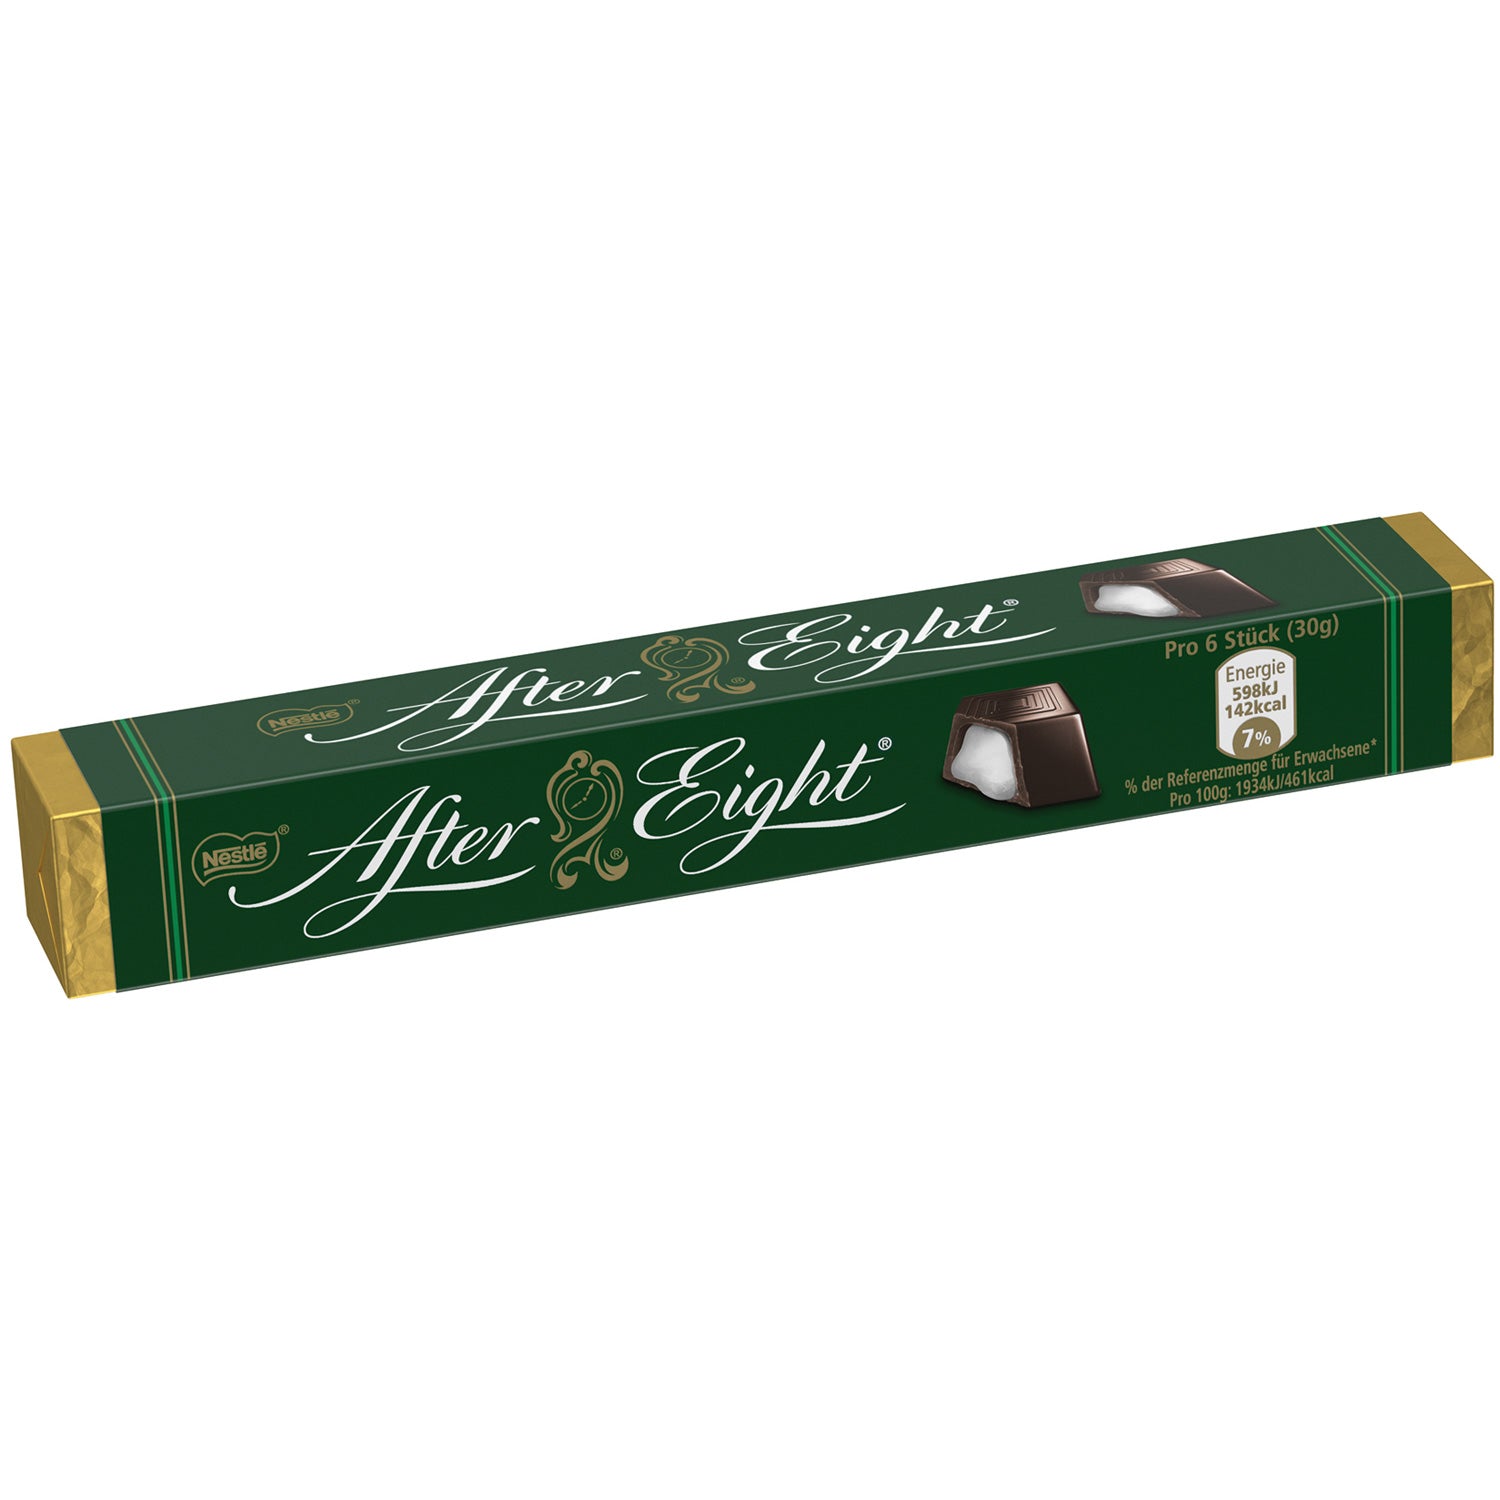 AFTER EIGHT 60G